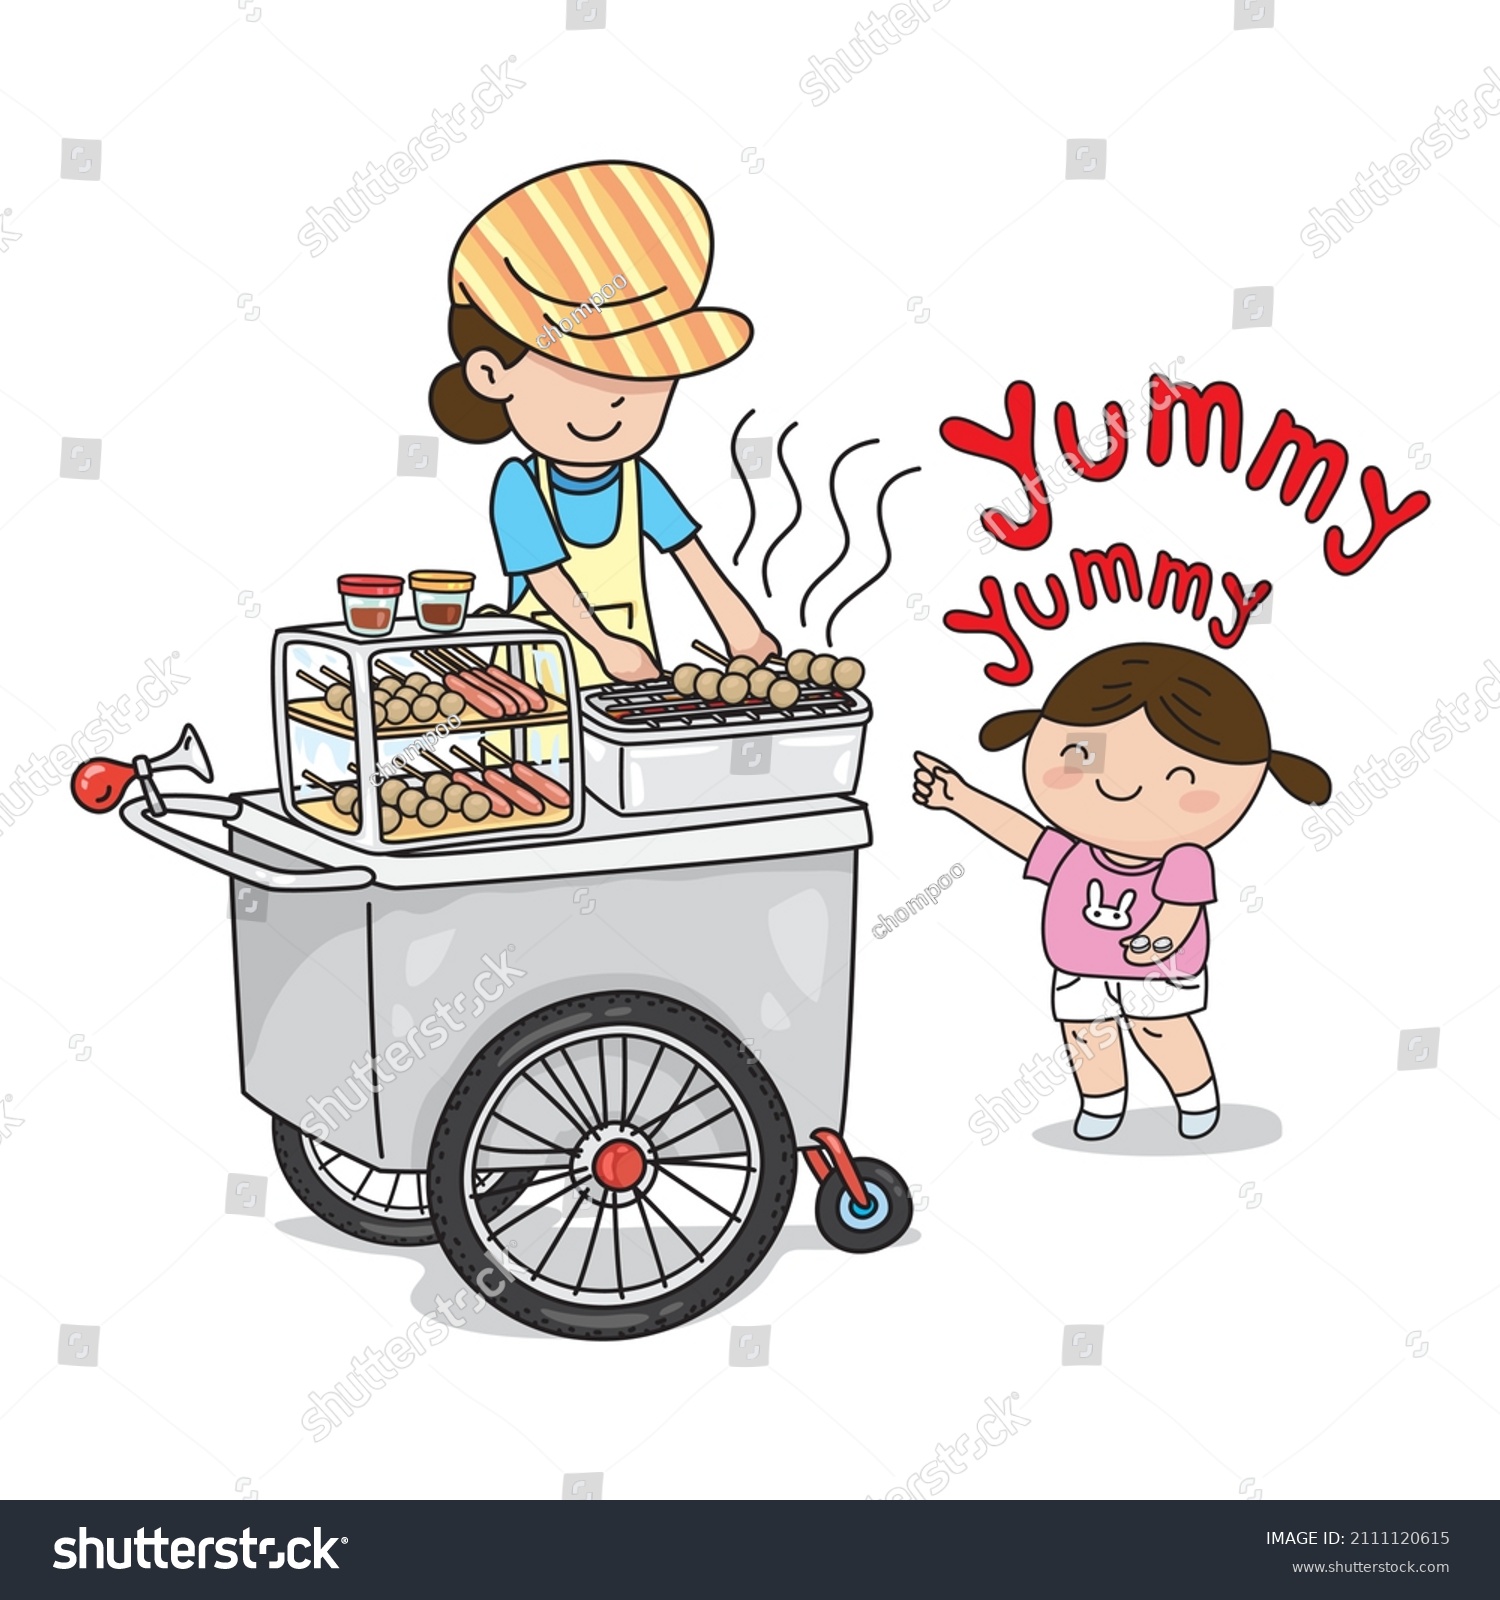 SVG of Cute young girl buys meatballs from a meatball cart selling, street food cart trolley, illustrator vector cartoon drawing
 svg